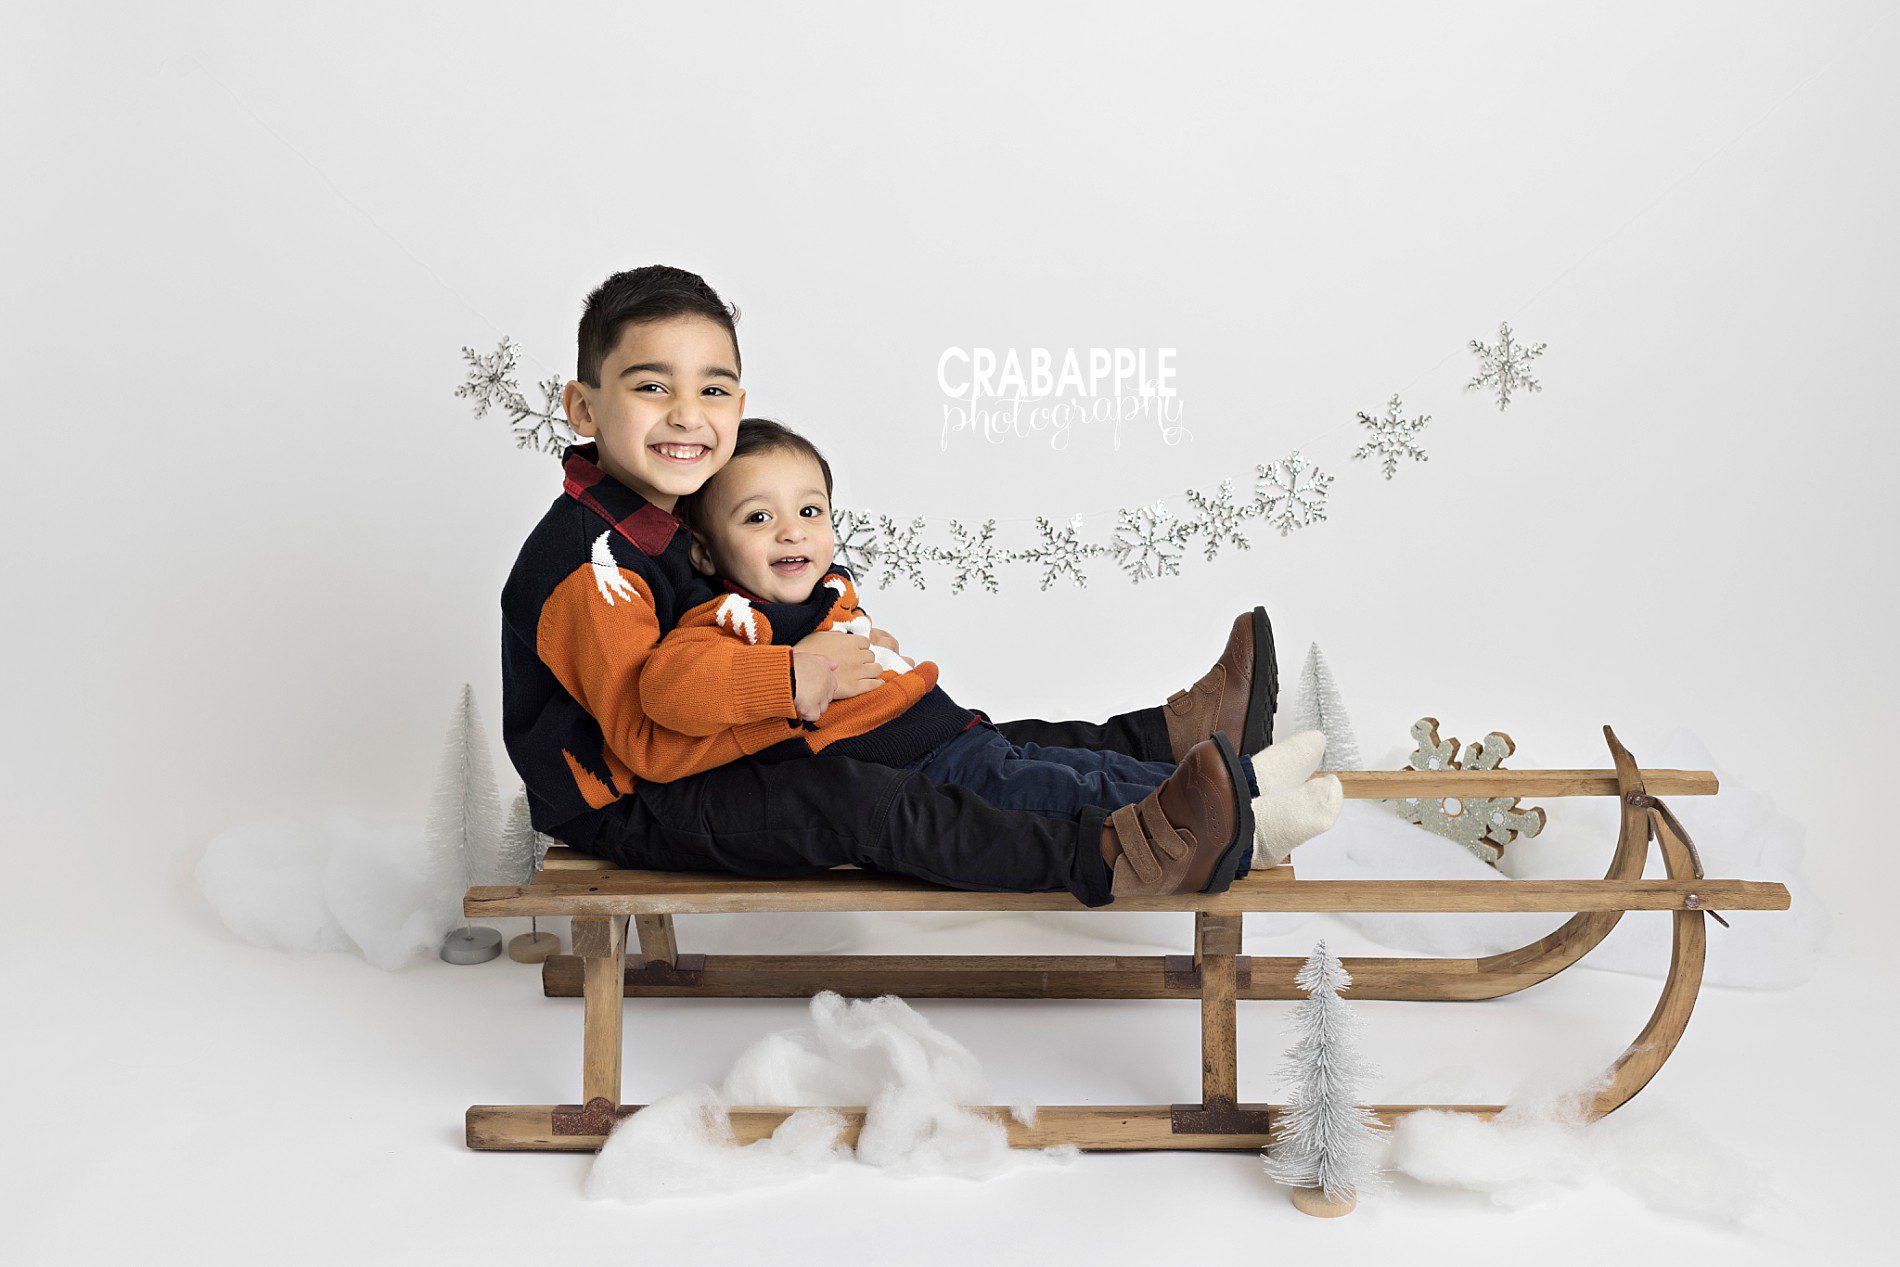 Winter child and baby portrait ideas with stylized set and vintage wooden sleigh